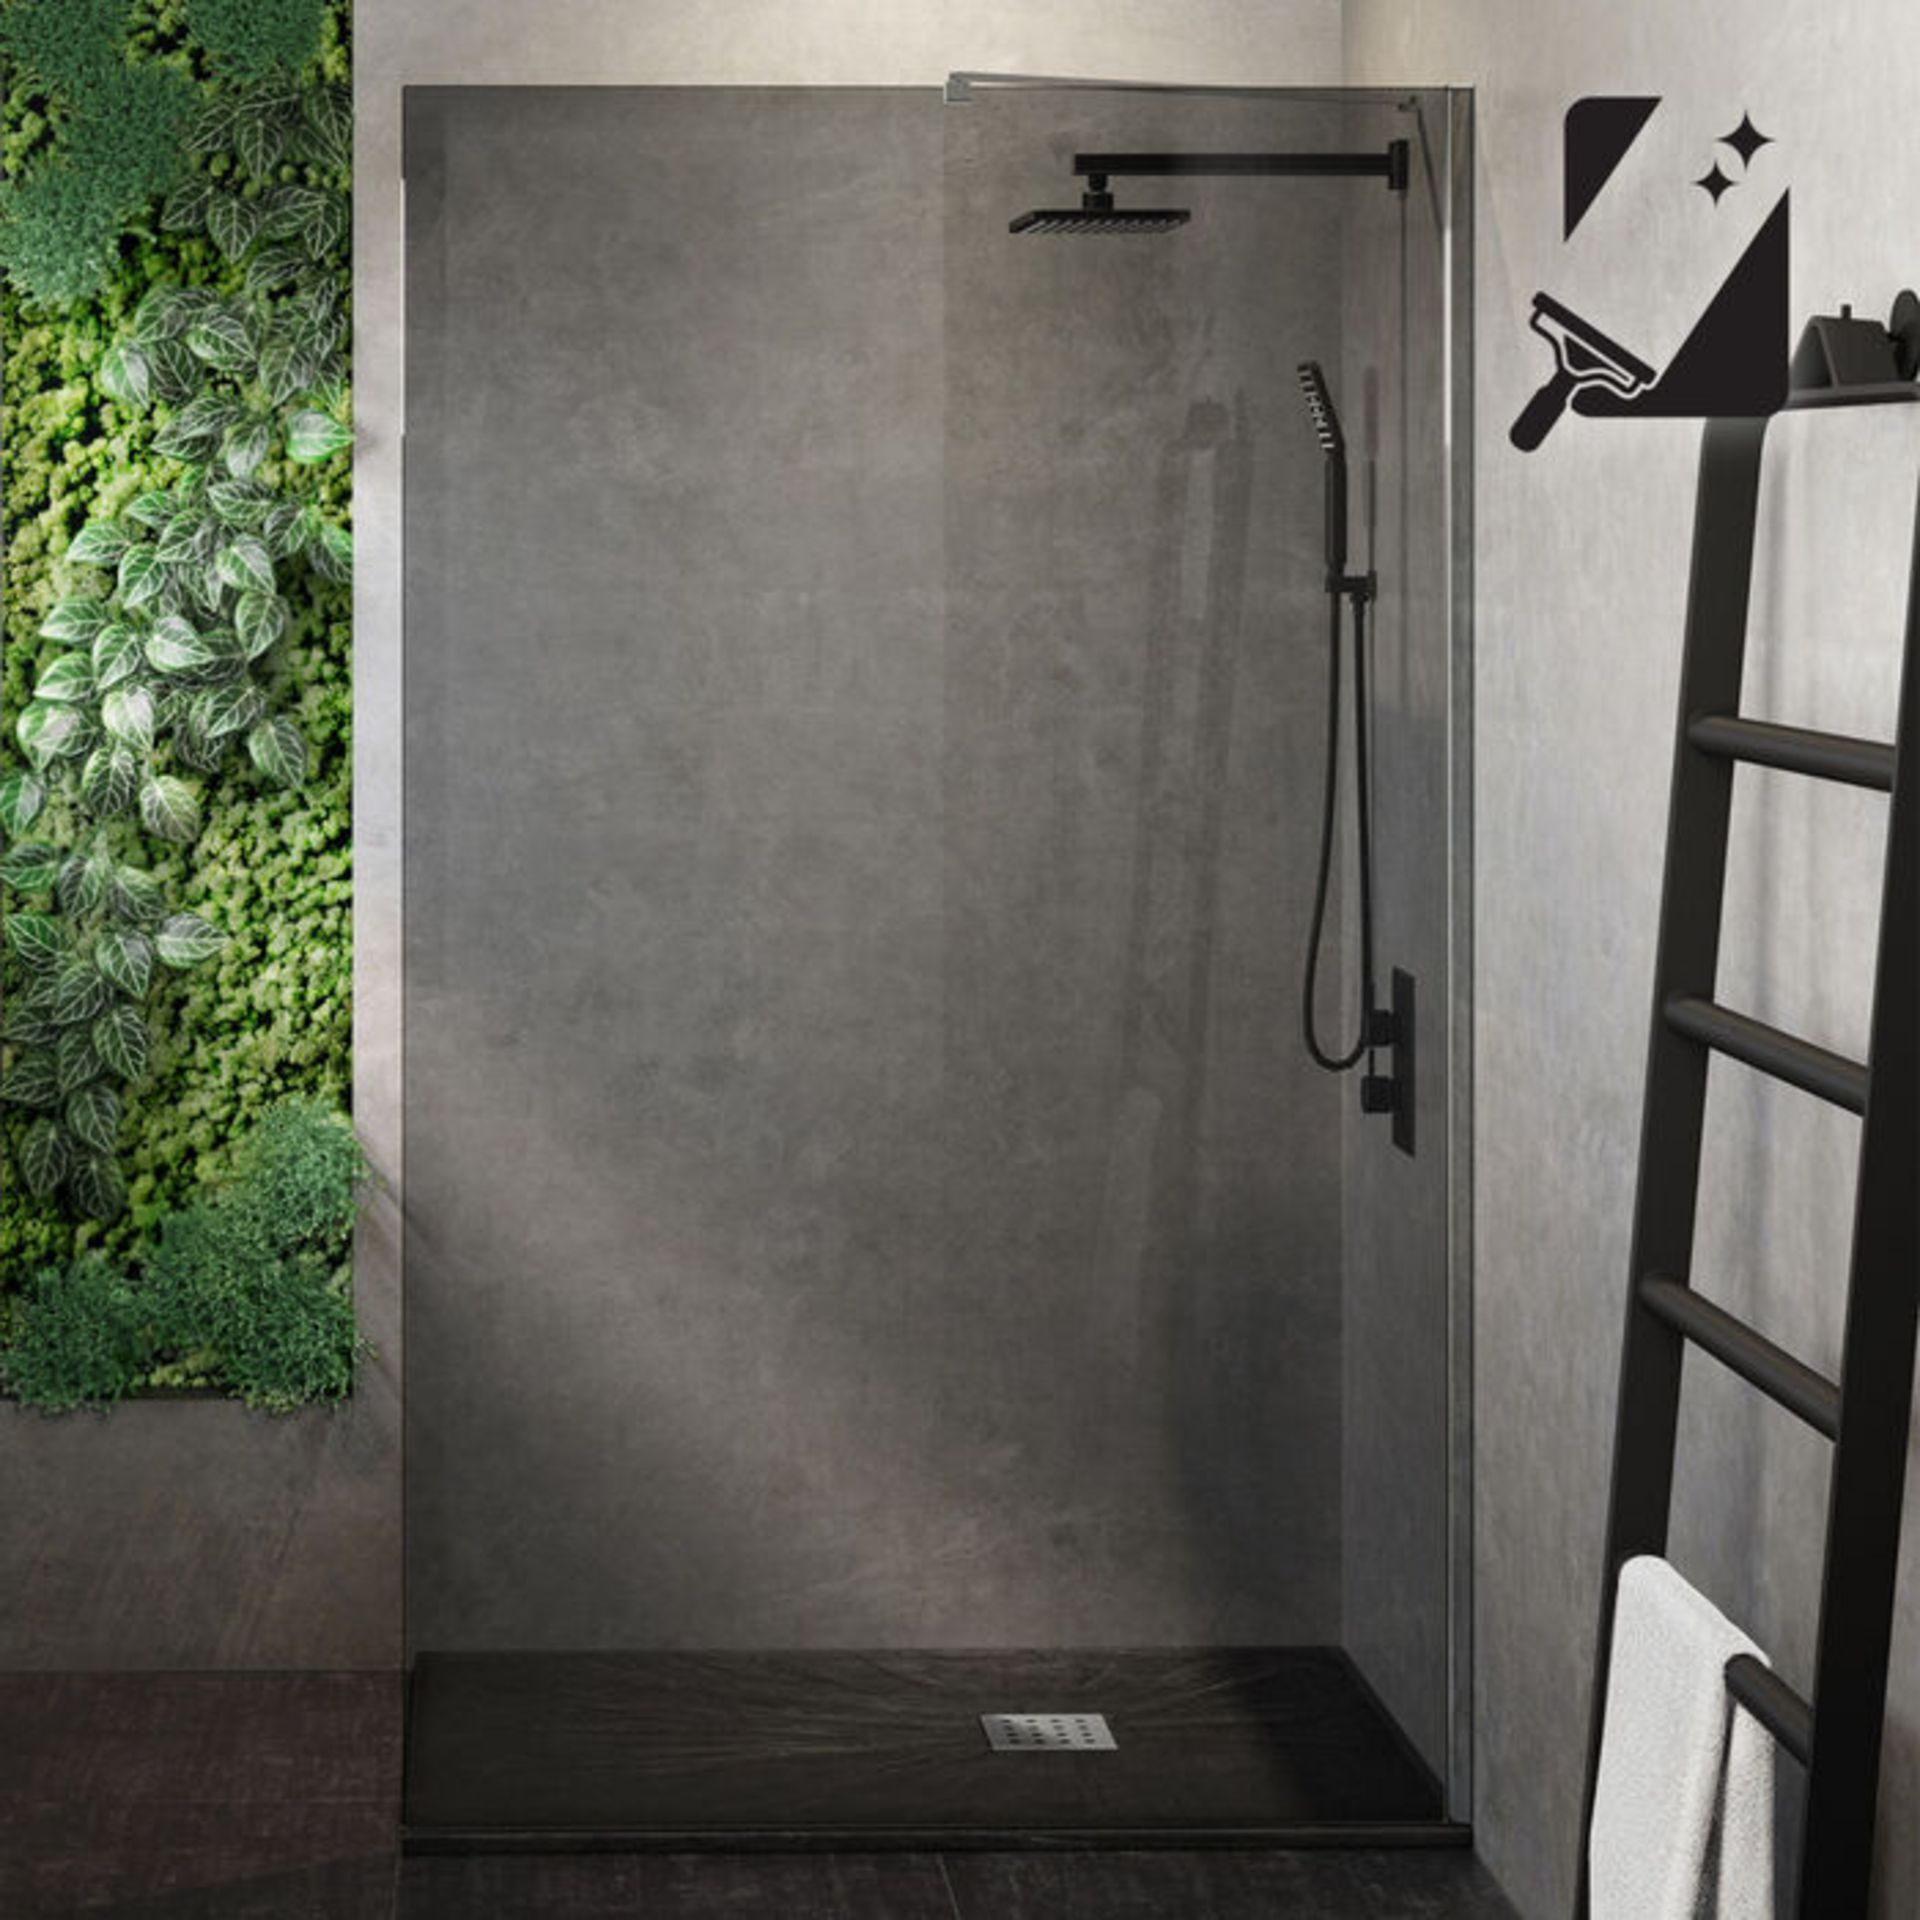 (JL10) 900mm - 8mm Designer EasyClean Smoked Glass Wetroom Panel. RRP £399.99. Stylish smoked ... - Image 2 of 5